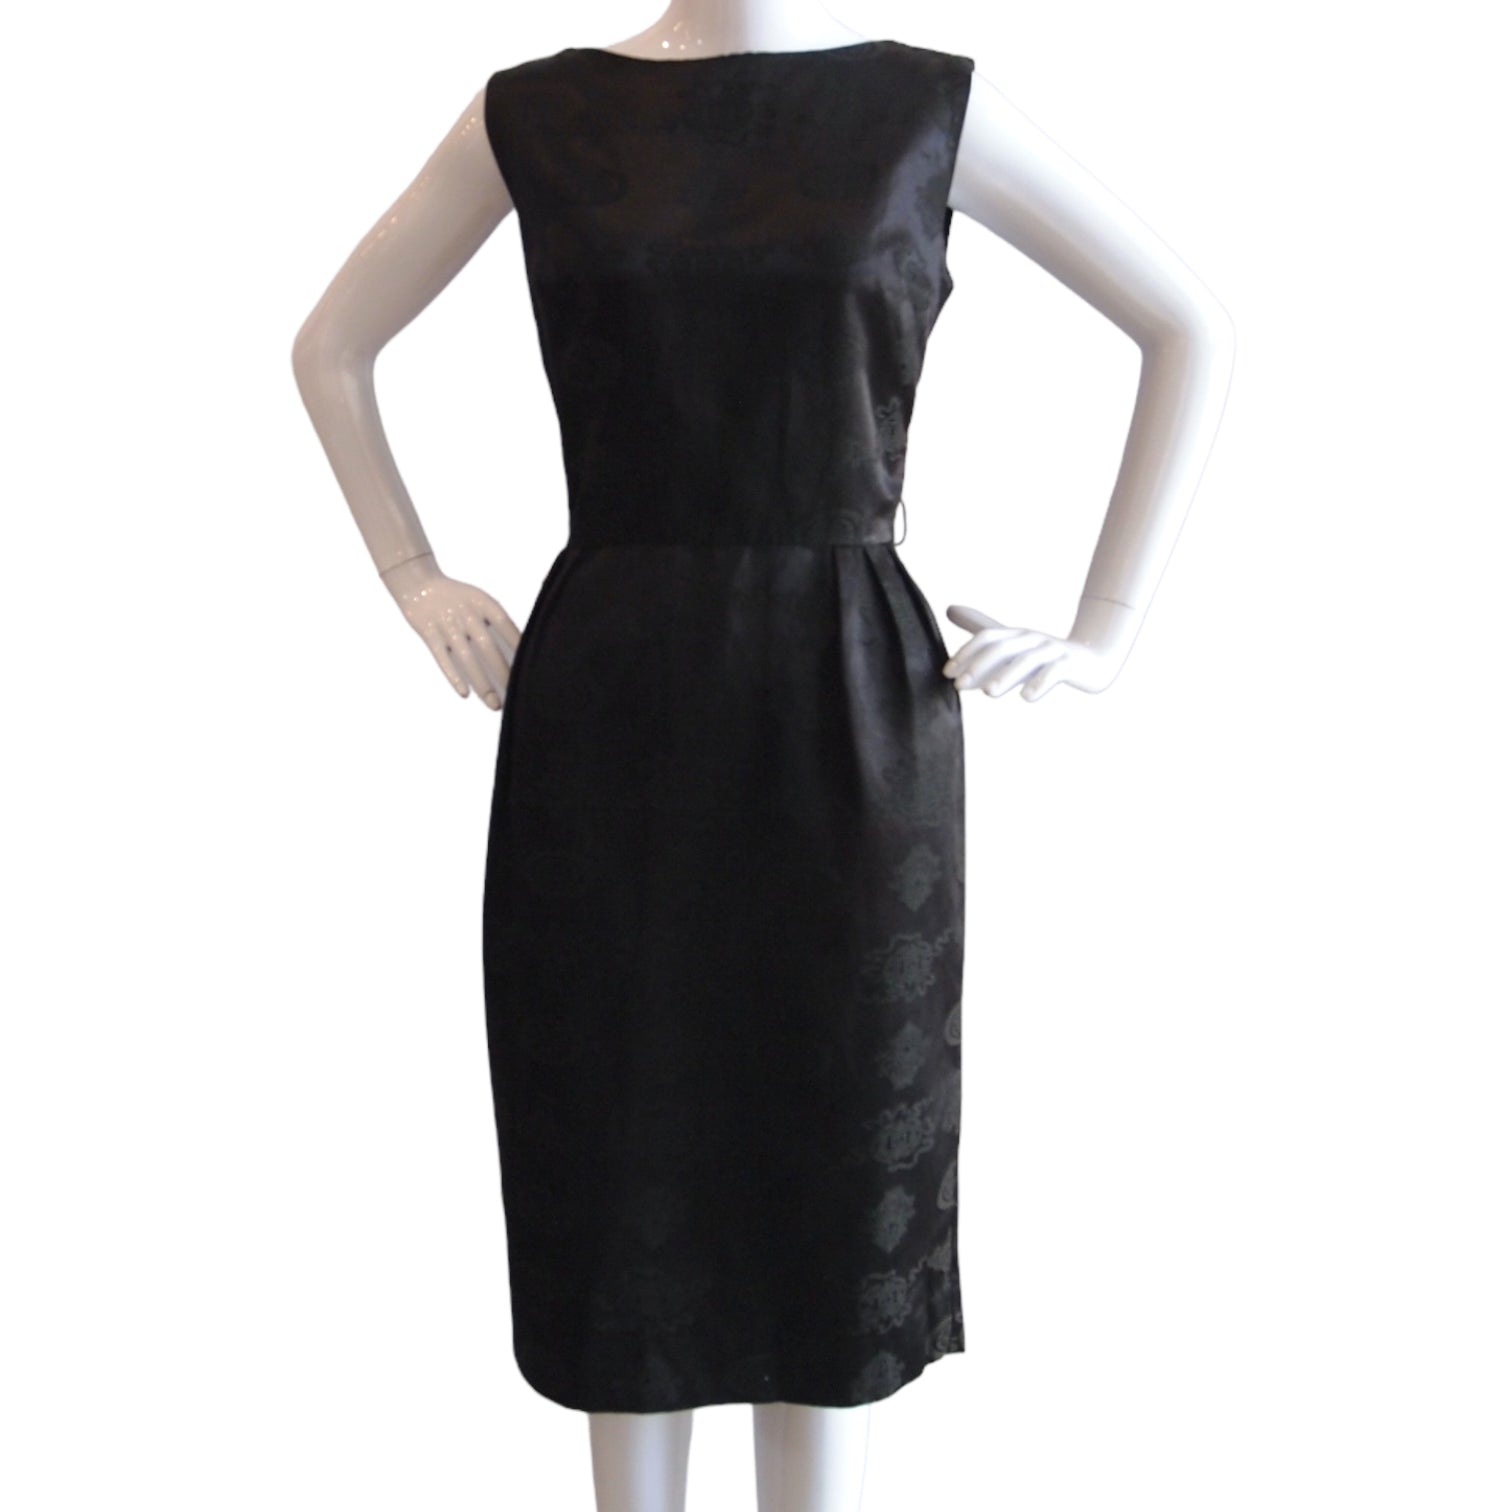 Chinois Black Early 60s Boatneck Cocktail Dress